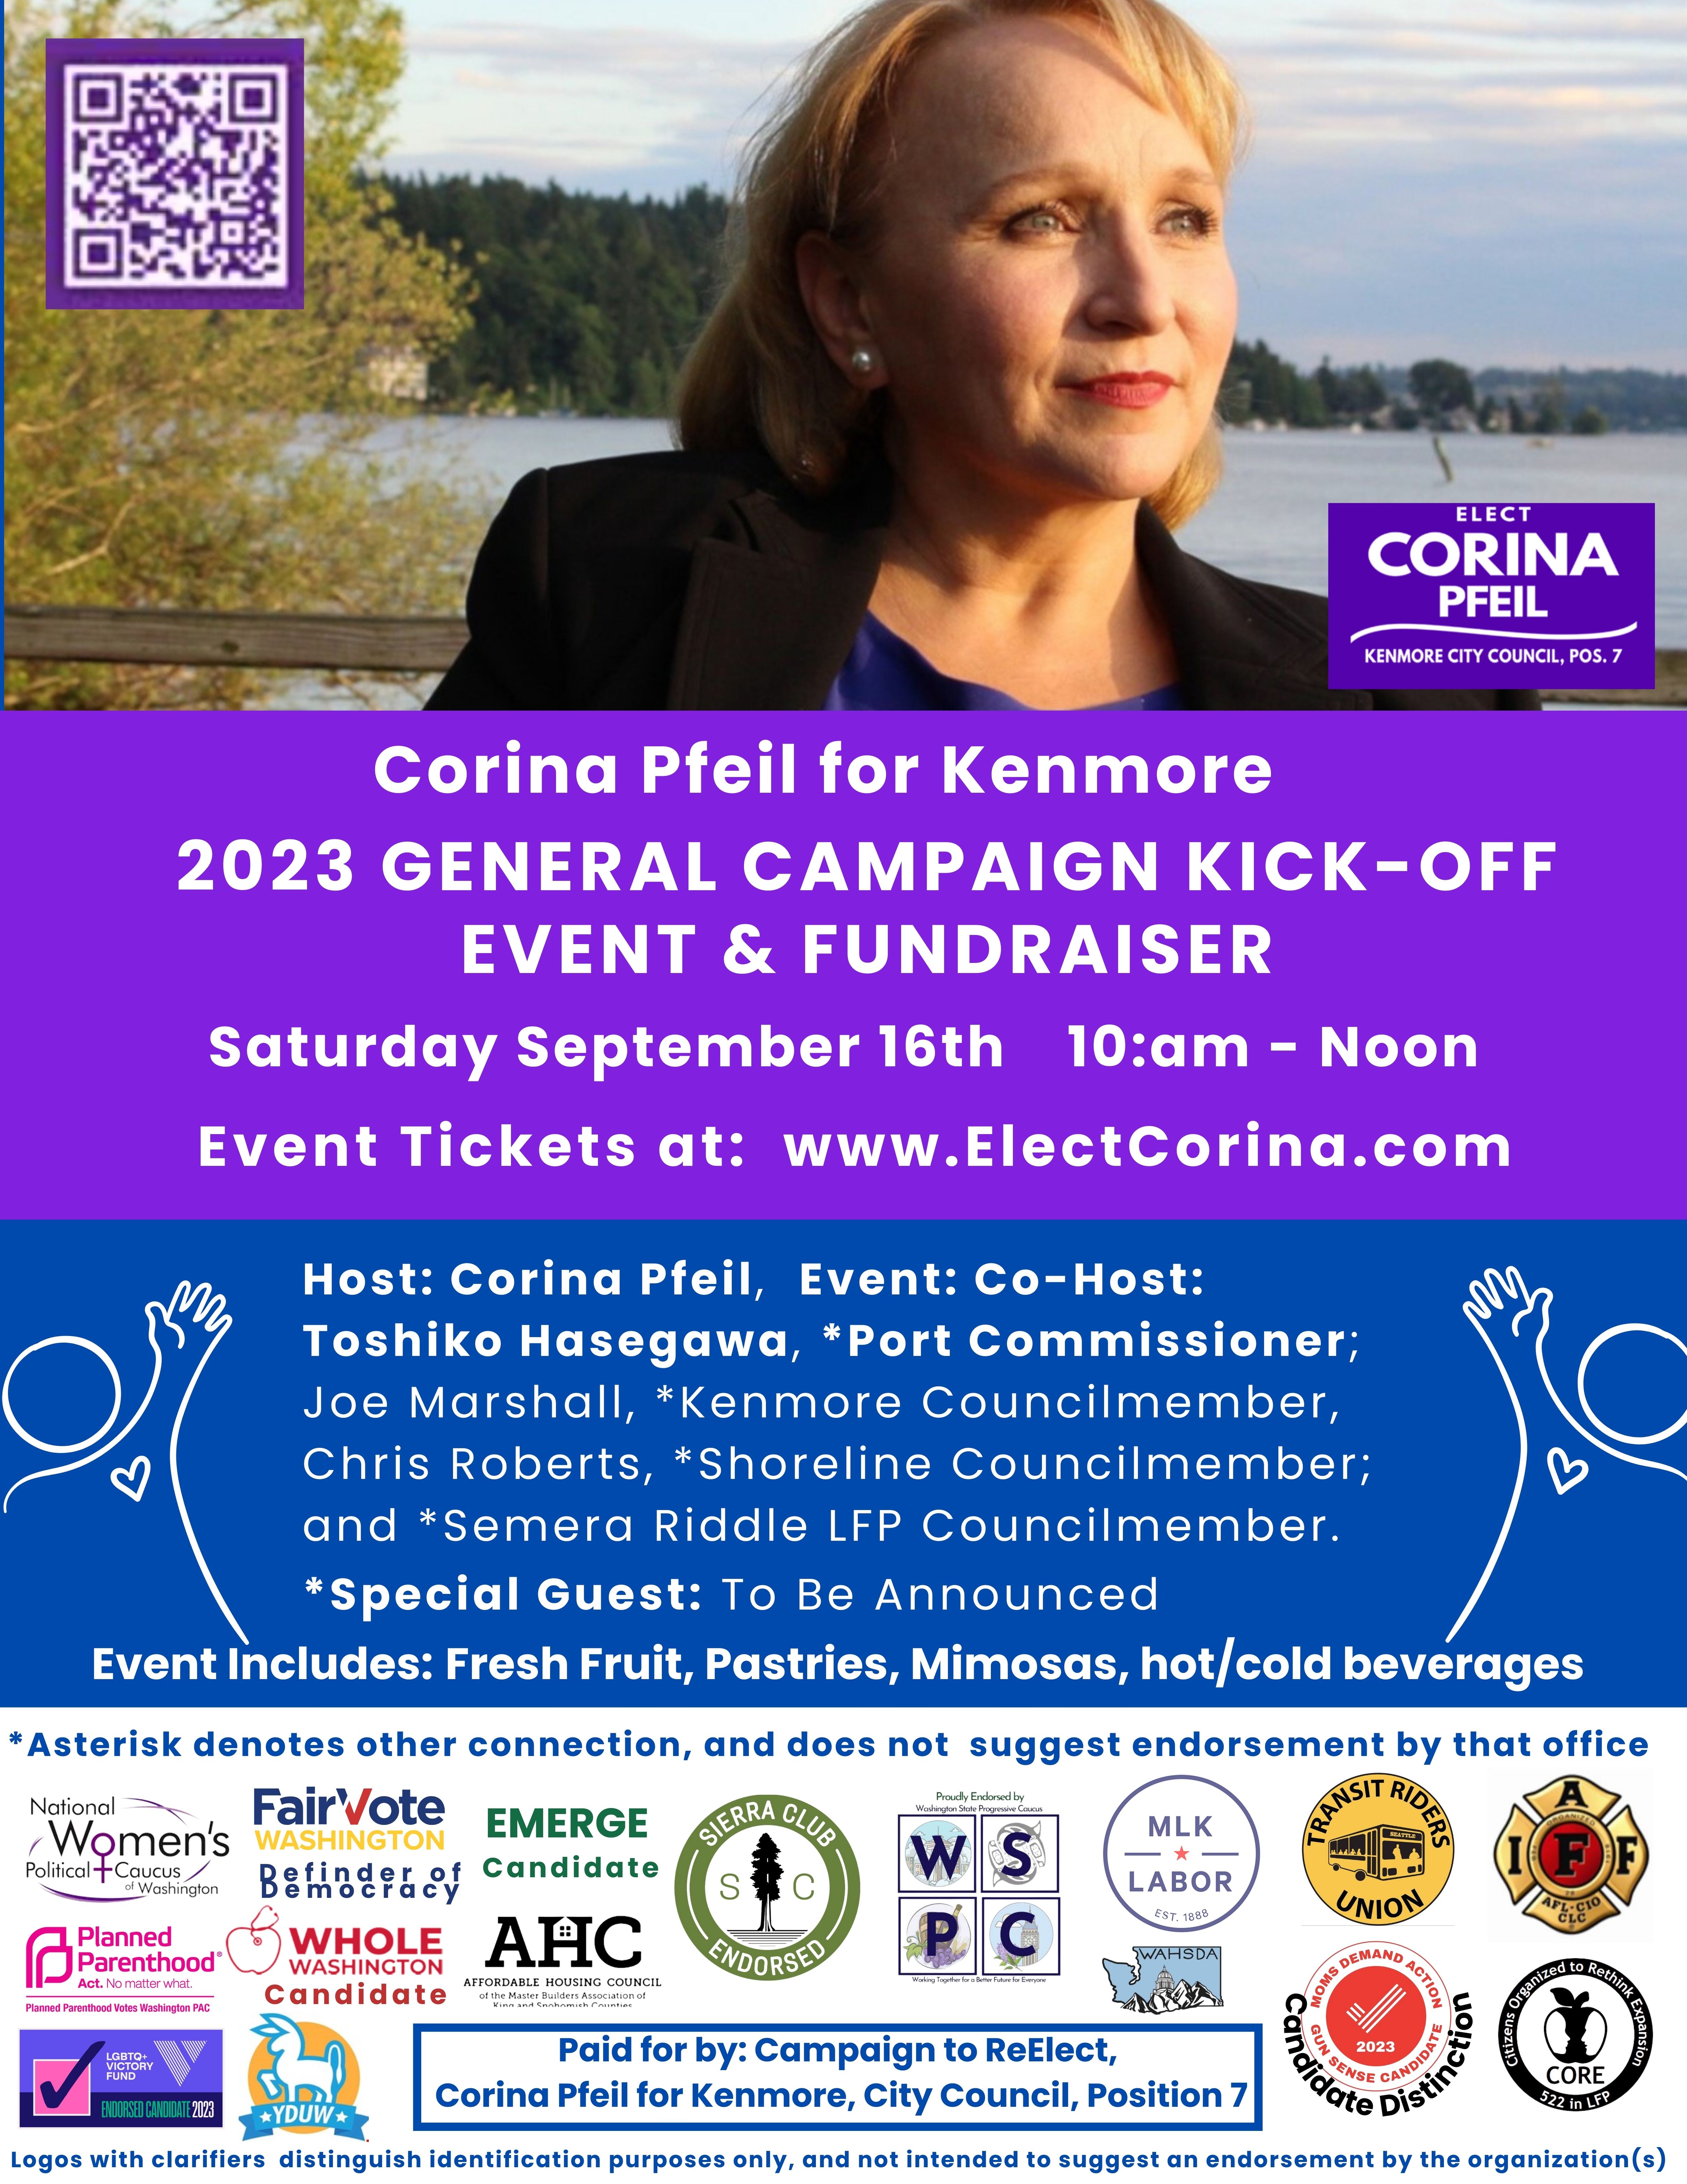 General Campaign Kick Off Event Supporting Corina Pfeil for Kenmore. Saturday September 16th, 10am to Noon.  Get your Event Tickets at: www.ElectCorina.com.  Event Host: Corina Pfeil, Event Co-Host Toshiko Hasegawa, *Port Commissioner; Joe Marshall *Kenmore Councilmember, Chris Roberts, *Shoreline Councilmember; and Semera Riddle, *Lake Forest Park Councilmember. Special Guest: Bob Ferguson.  Event Includes: Fresh Fruit, Pastries, Mimosas, along other hot/cold beverages.   *Disclaimer: Astrick indicates other conneced position and does not suggest endorsement of the office.  Paid for by the Campaign to Re-Elect Corina Pfeil for Kenmore, City Council Position 7.